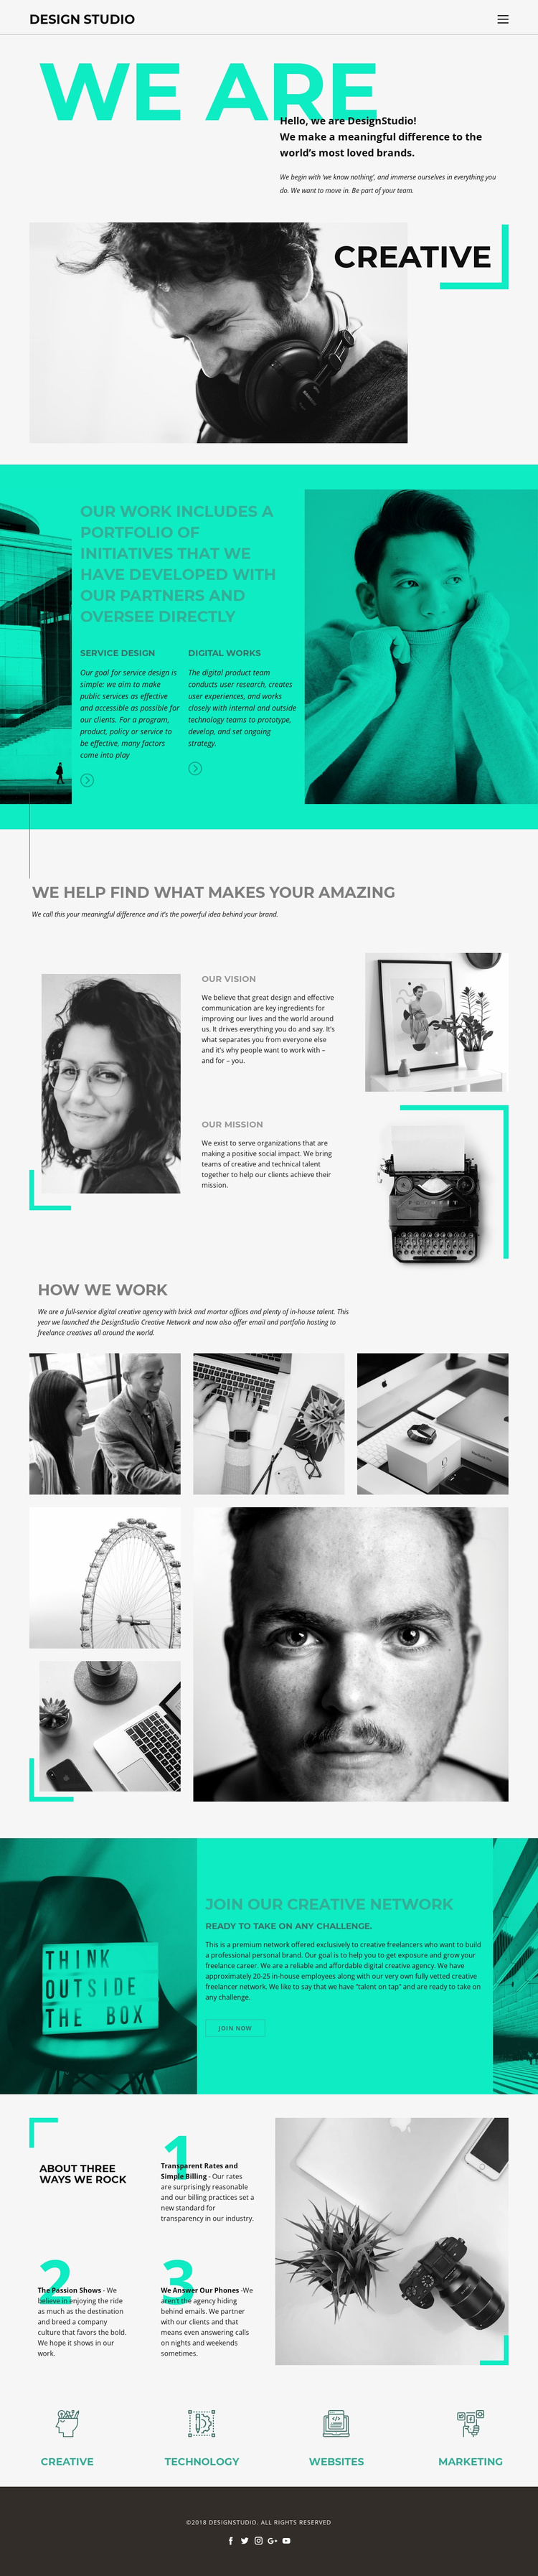 We are creative business eCommerce Template